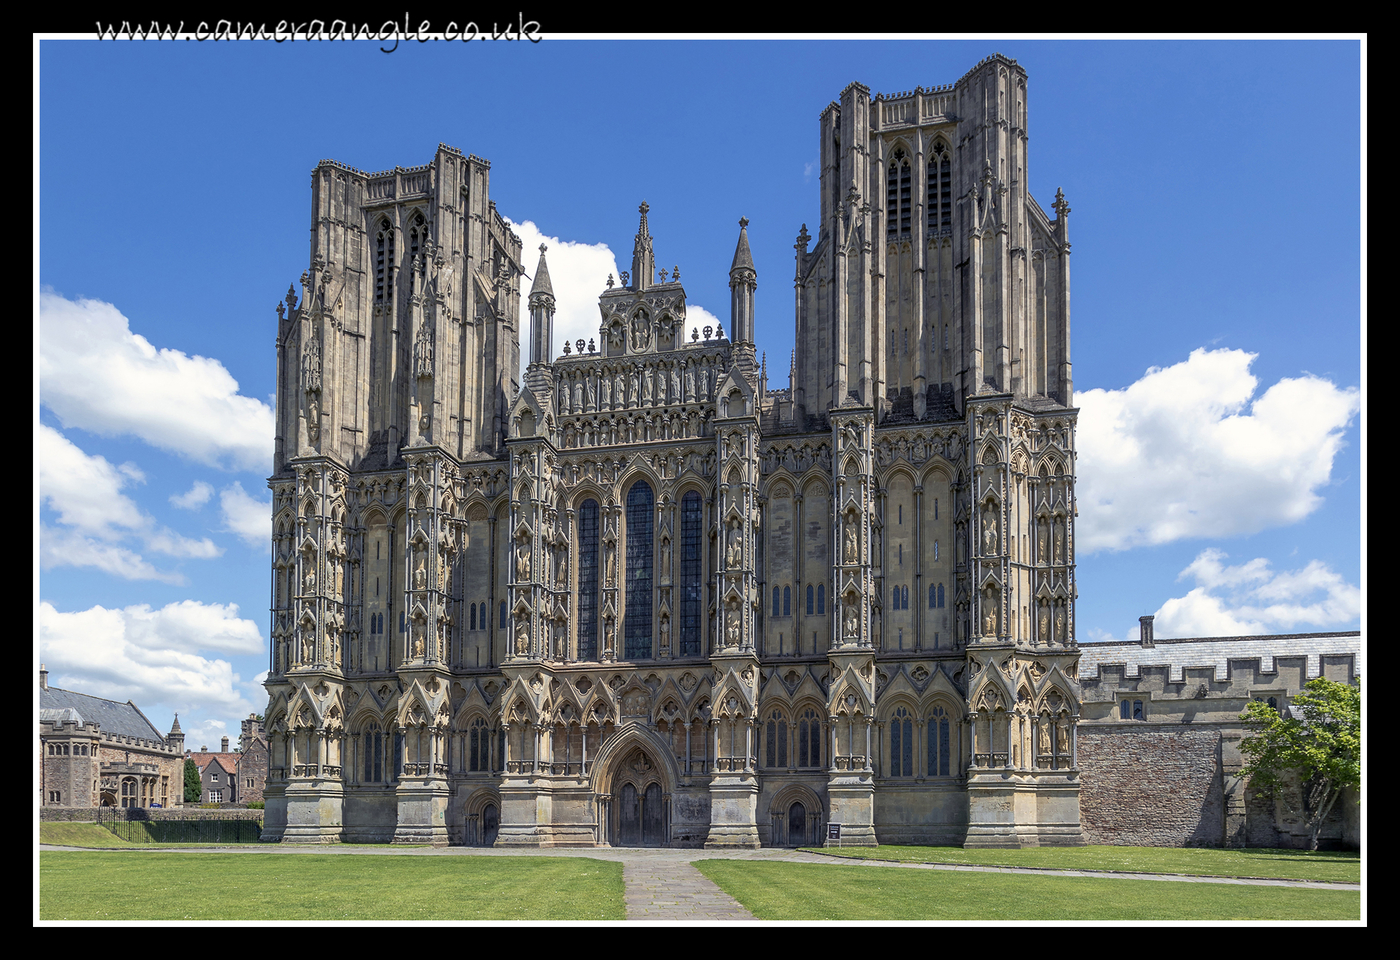 Wells Cathedral
Keywords: Wells Cathedral Mendips Tour